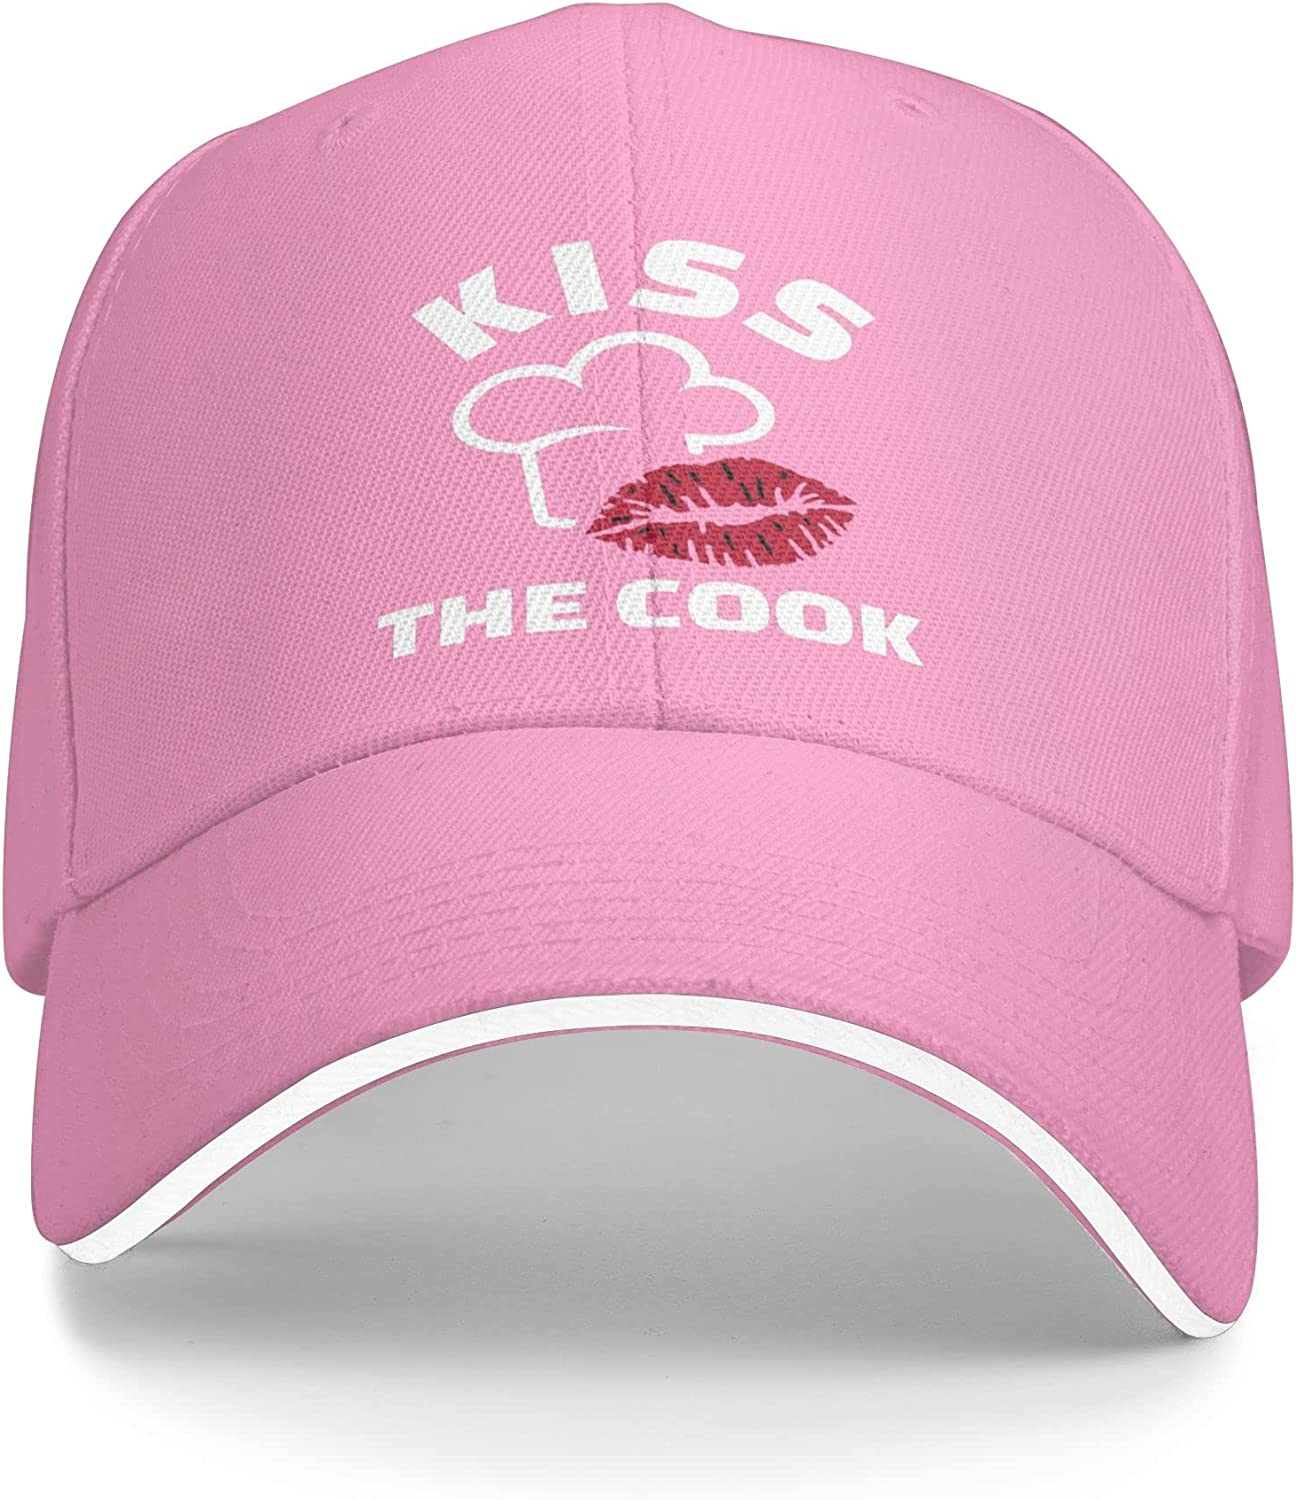 Casquette kiss the cook